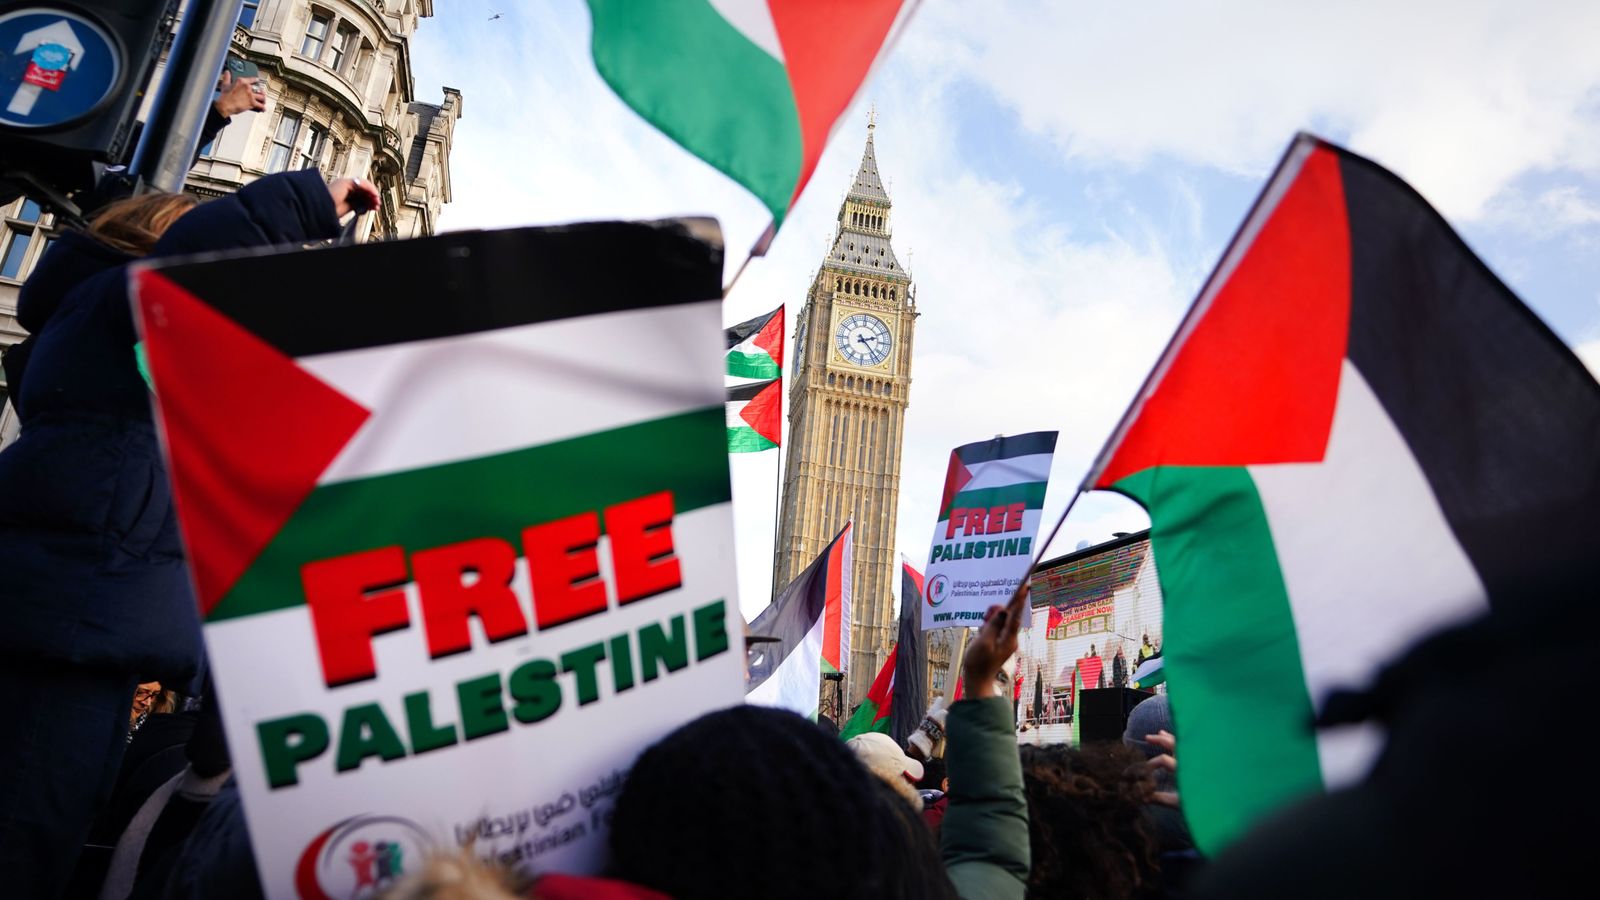 Pro-Palestinian protests turning London into a 'no-go zone for Jews every weekend', claims counter extremism tsar